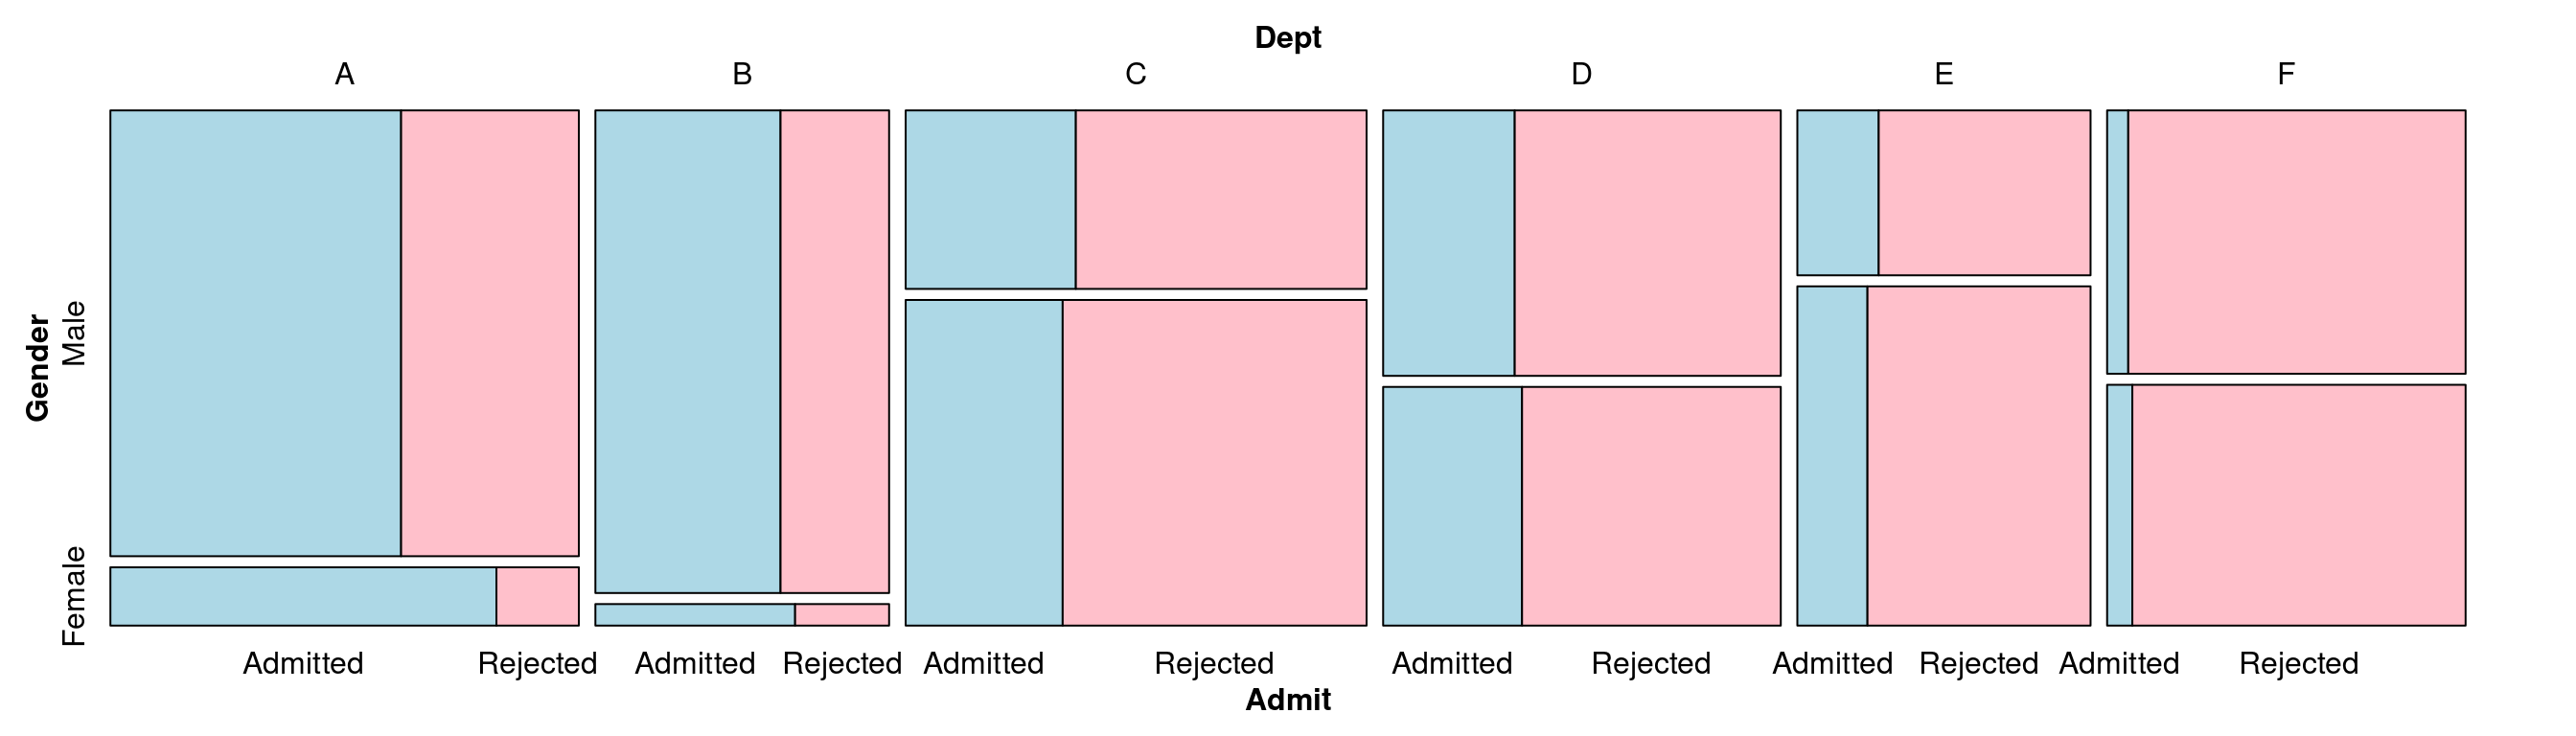 Mosaic plot with a different variable splitting order: first department, then gender, then admission status